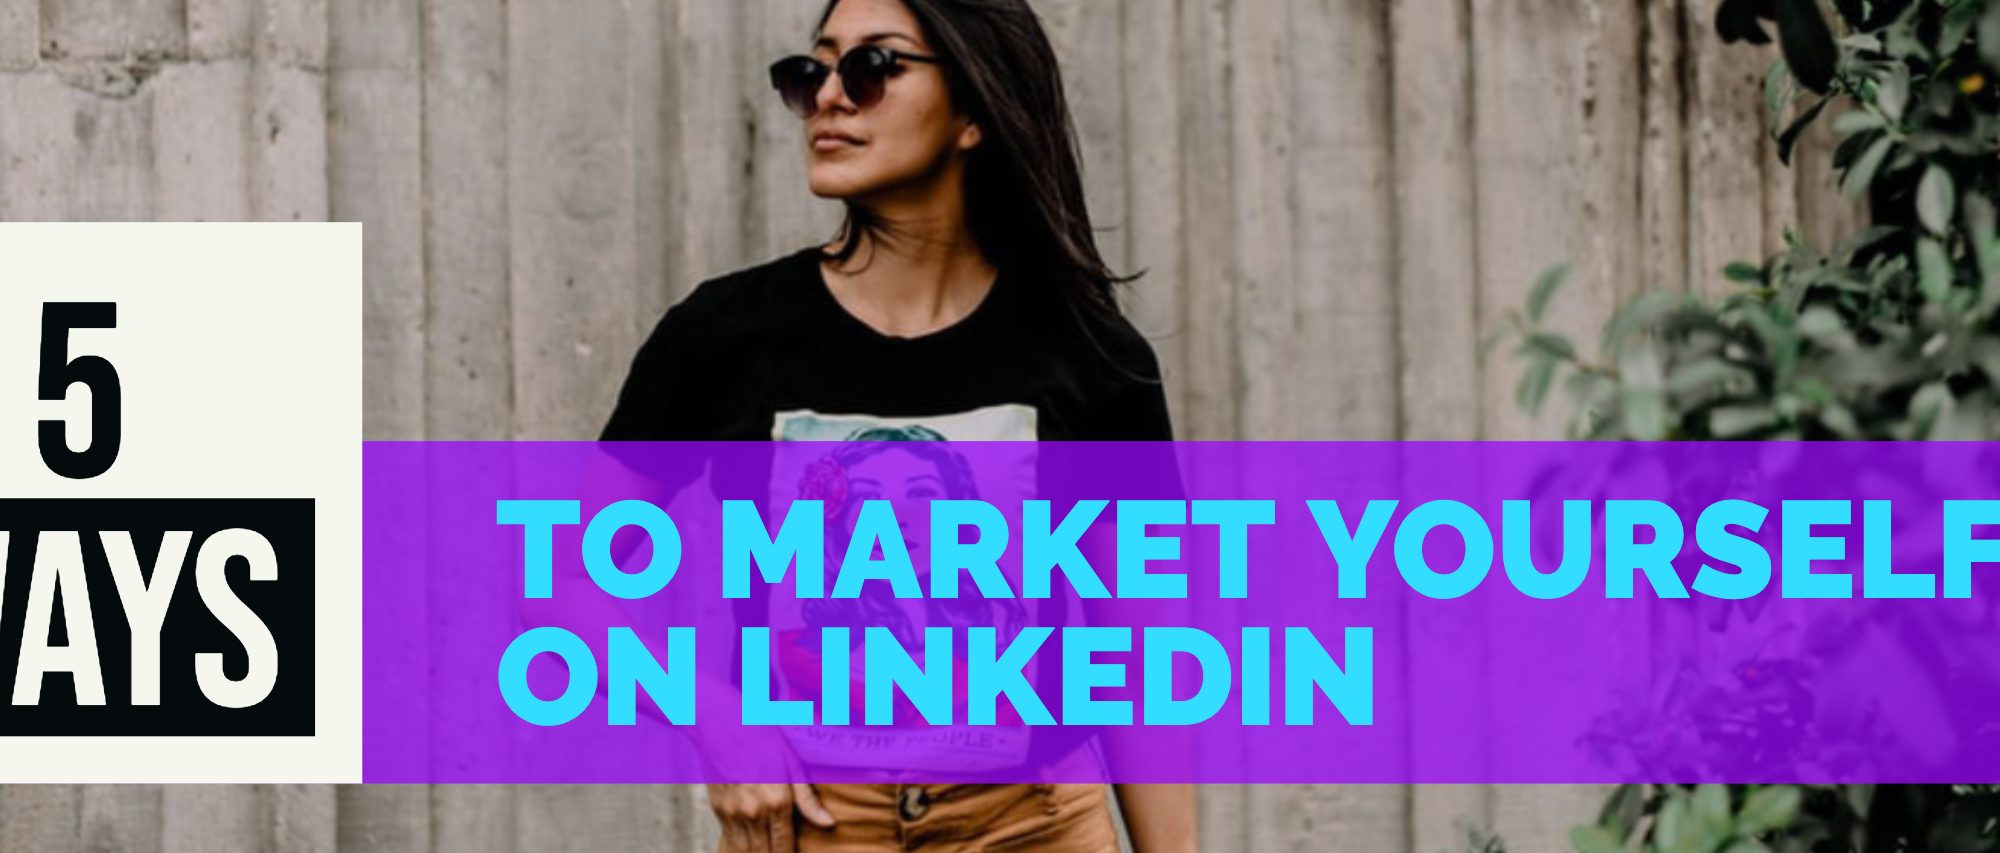 5 ways to market yourself on linkedin increase sales corporate sales coaching 10x growth best sales training